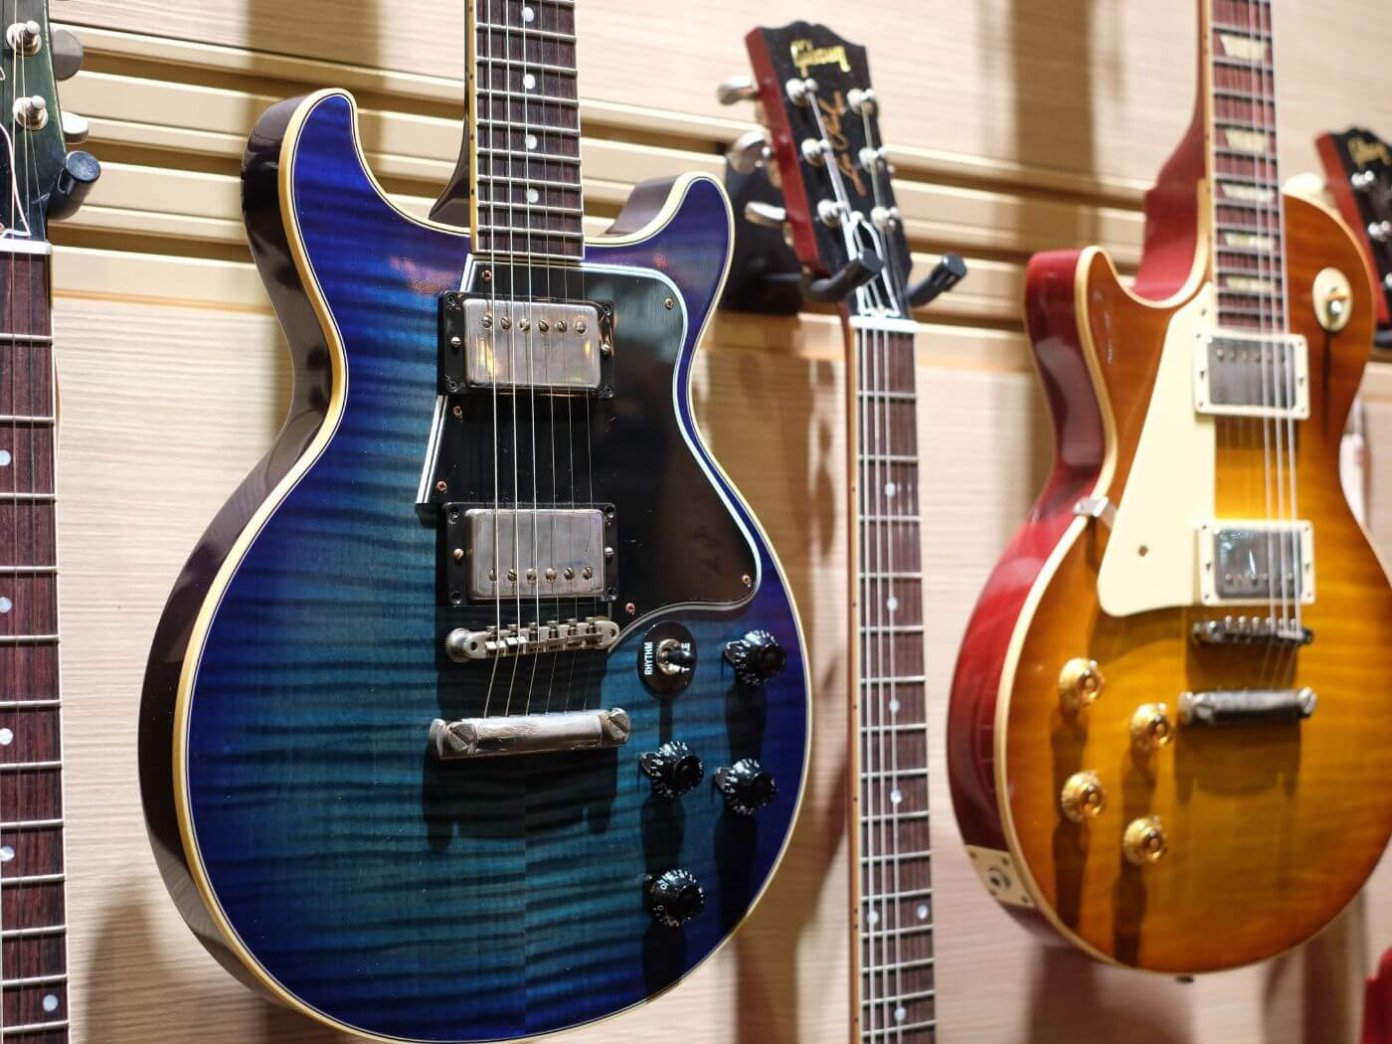 In Pictures New Gibson guitars at Summer NAMM 2019